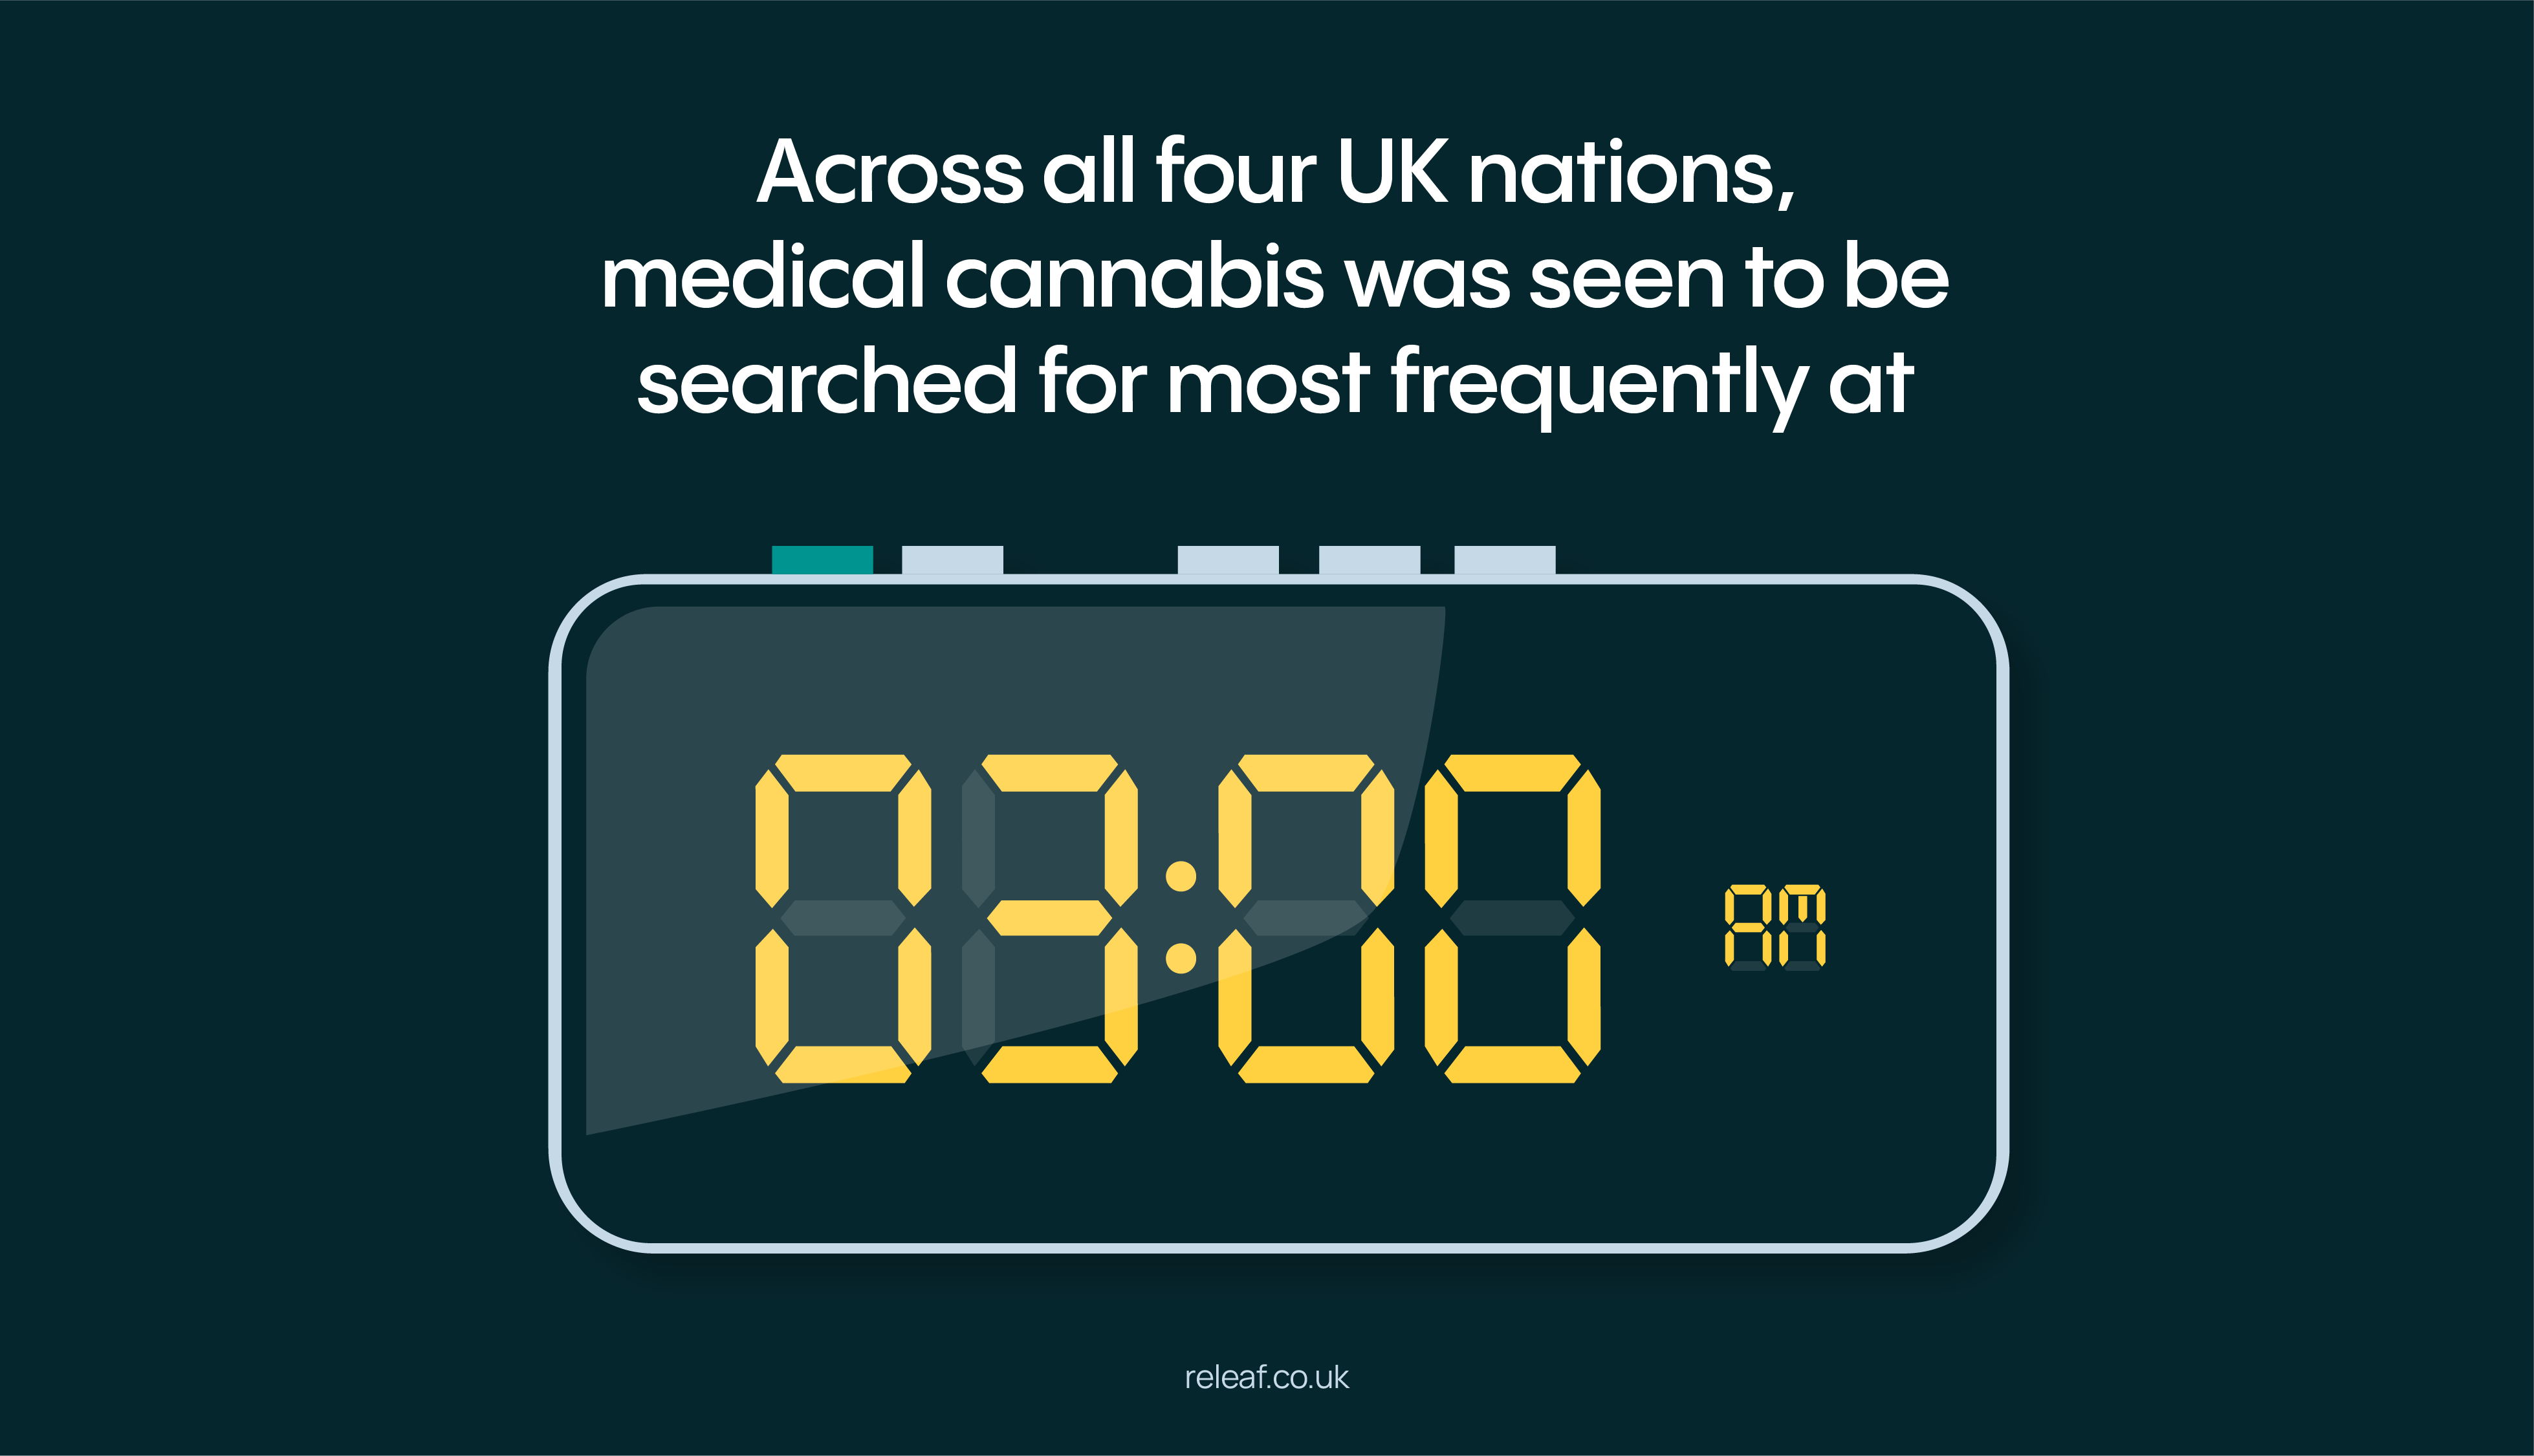 Across all 4 nations in the UK, medical cannabis was seen to be searched for most frequently at around 3am. 